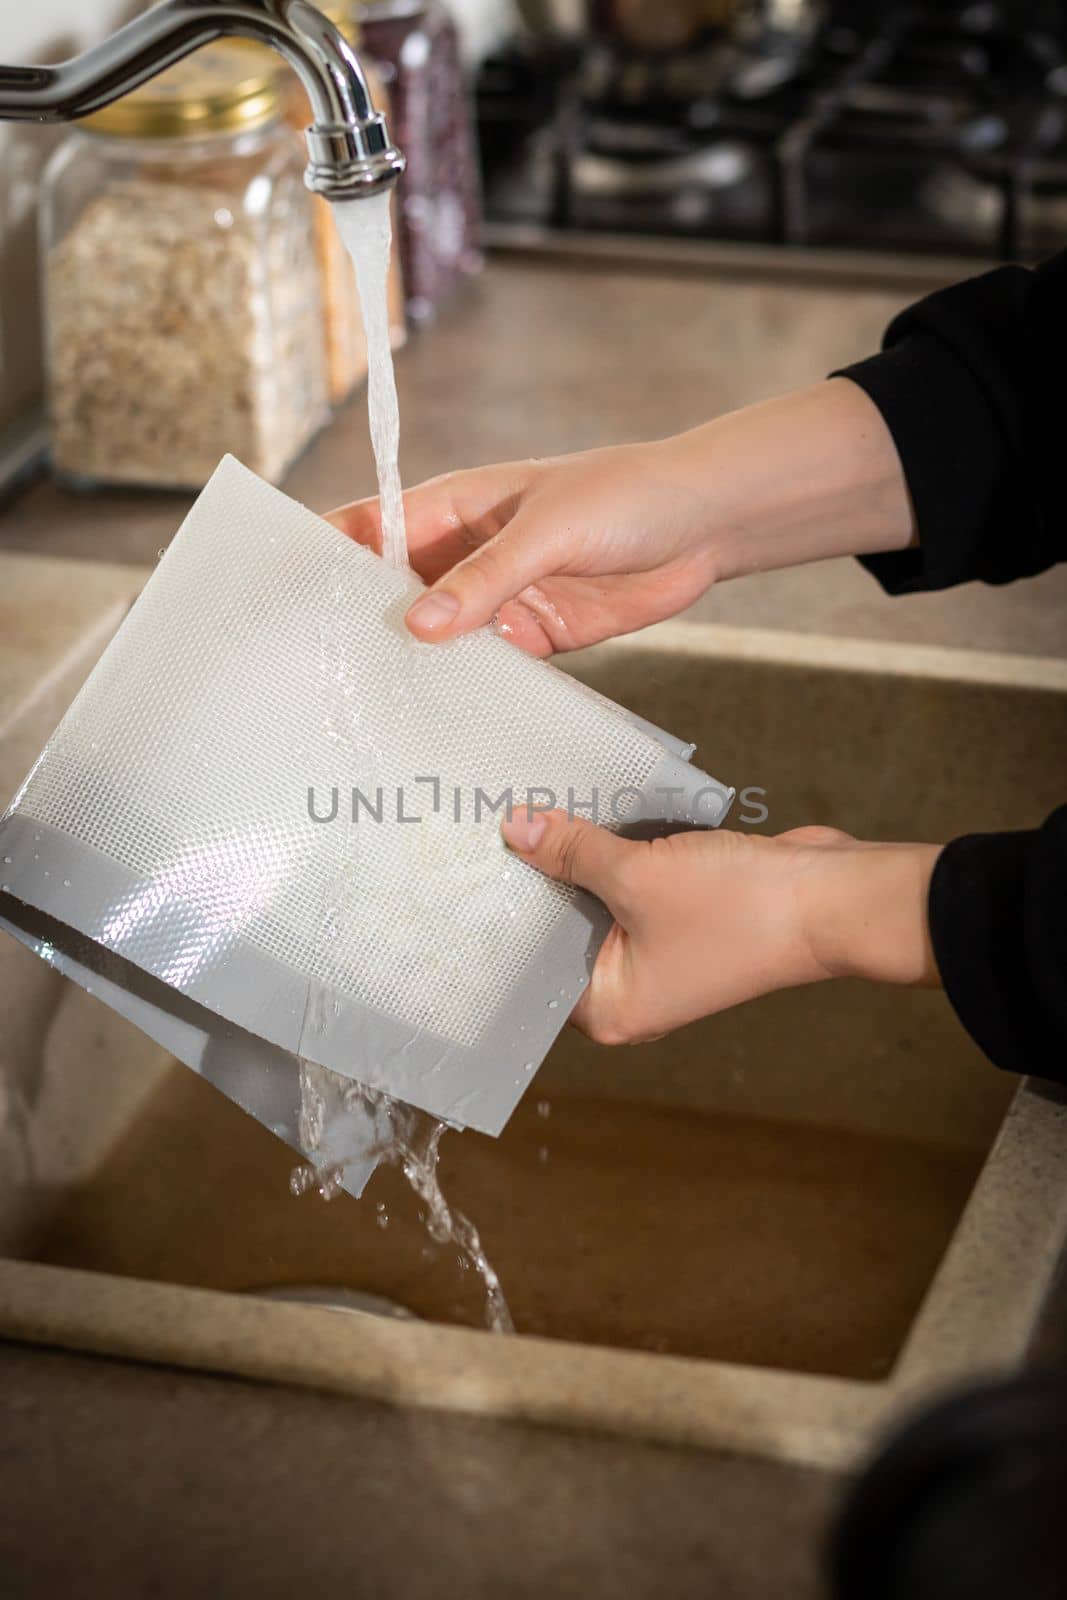 Silicone baking mat is washed under an open stream of water after cooking in the kitchen.